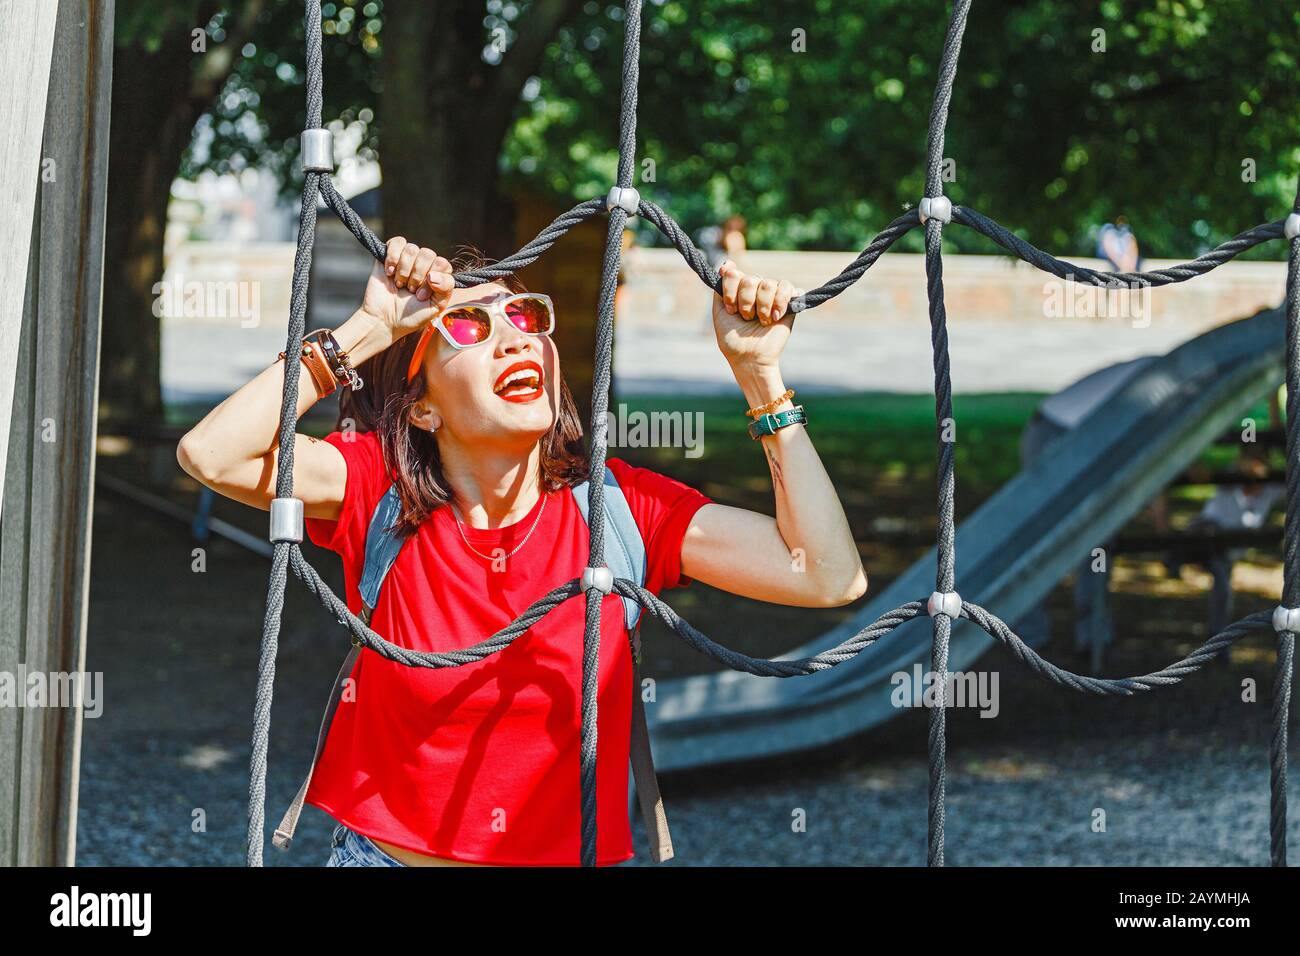 Adult Woman Playing On Playground Rope Stock Photo 1107071456